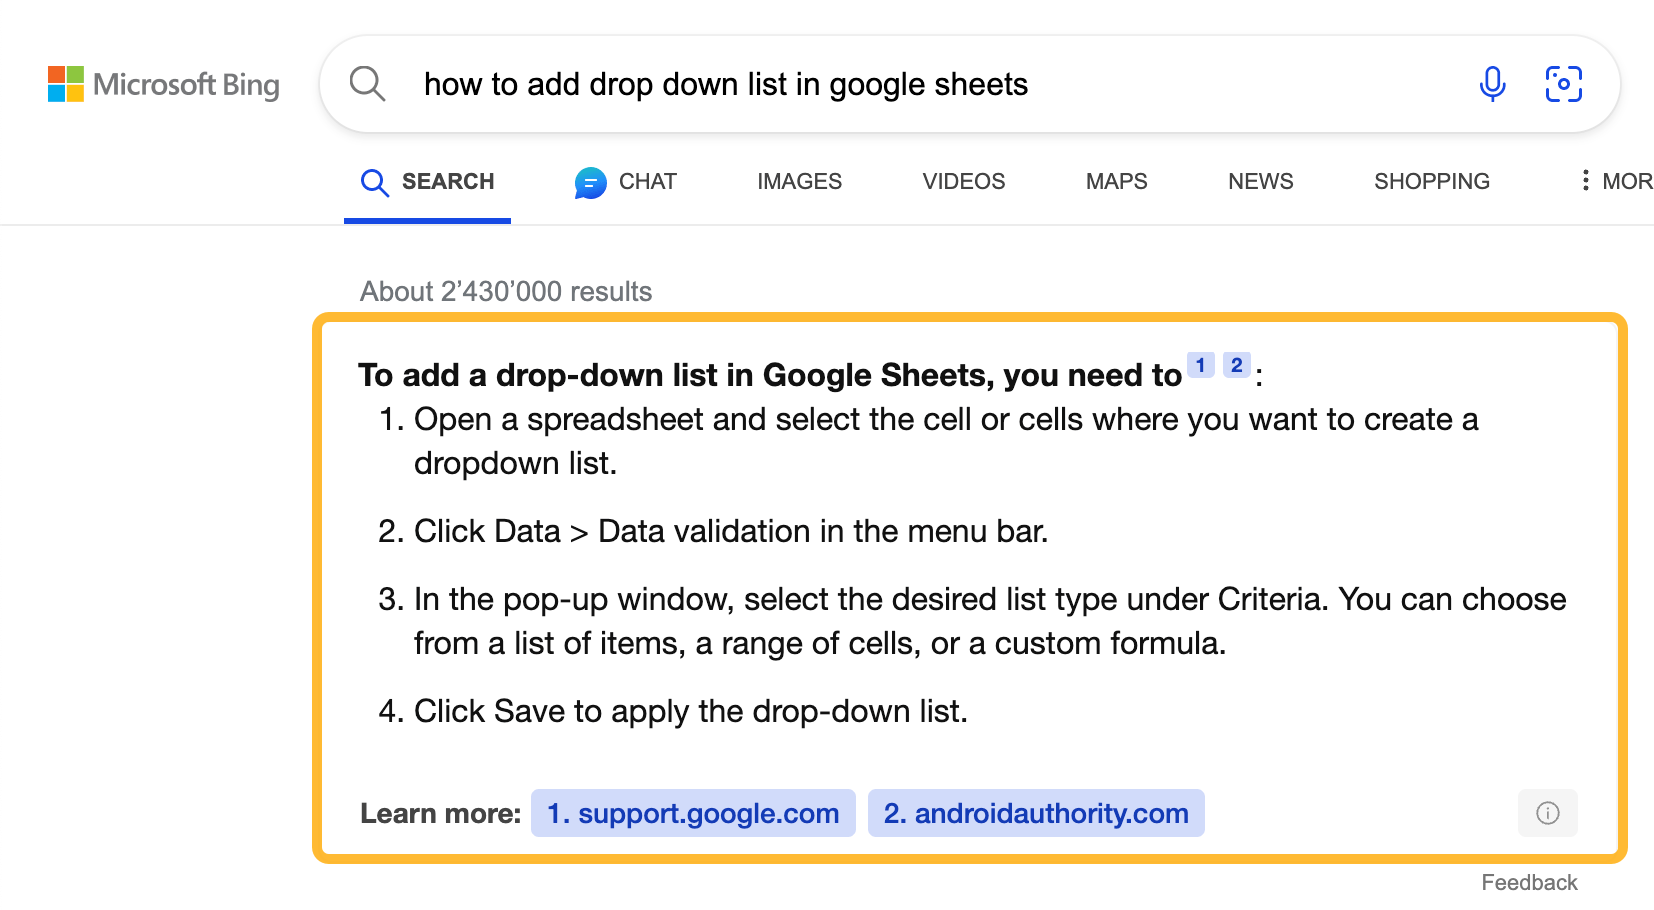 Bing's search results for "how to add drop down list in google sheets"